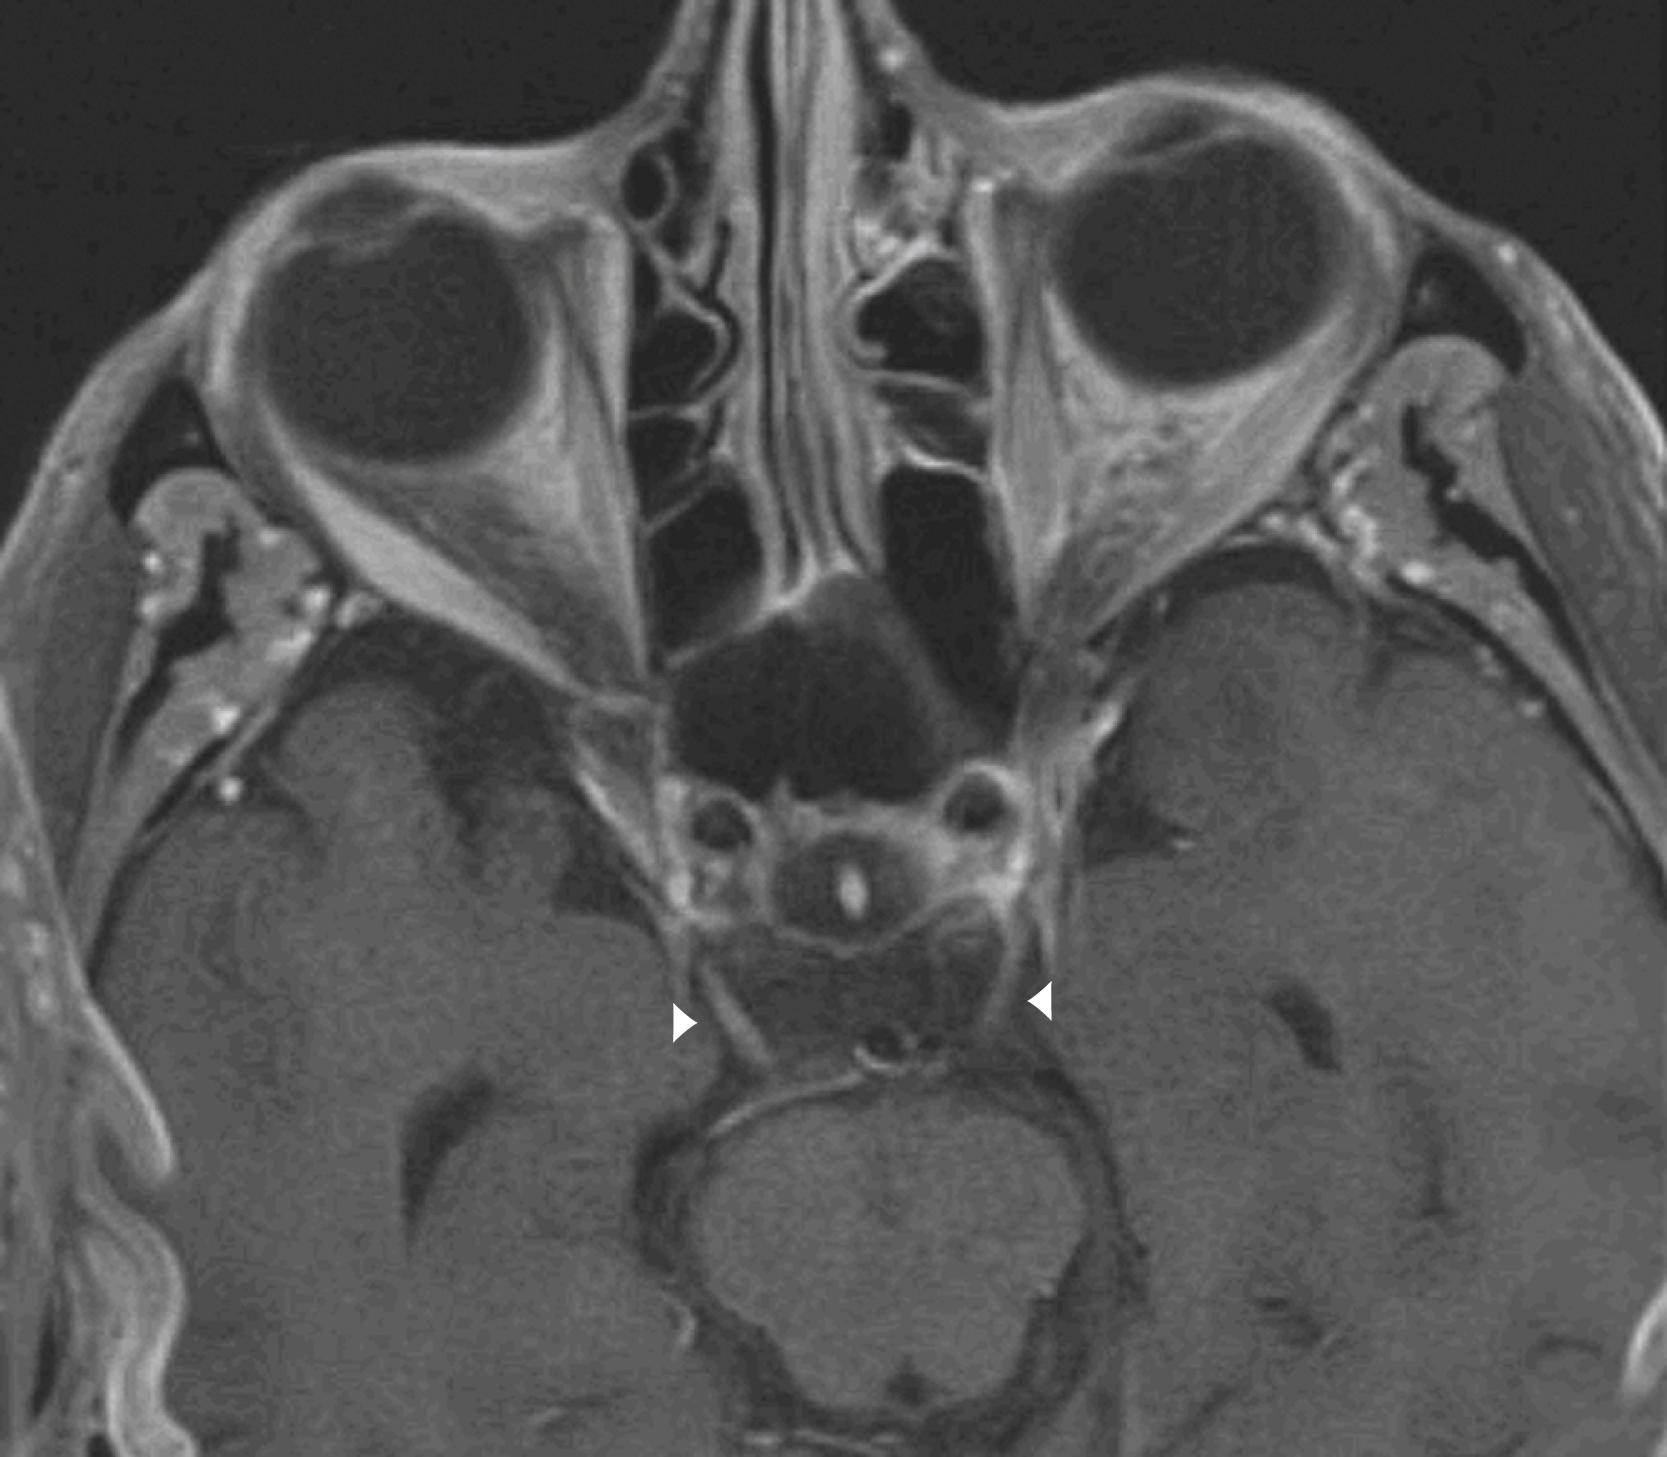 eFig. 103.4, Axial T1-weighted MRI with gadolinium at the level of the midbrain demonstrates abnormal bilateral oculomotor nerve enhancement (arrowheads) .